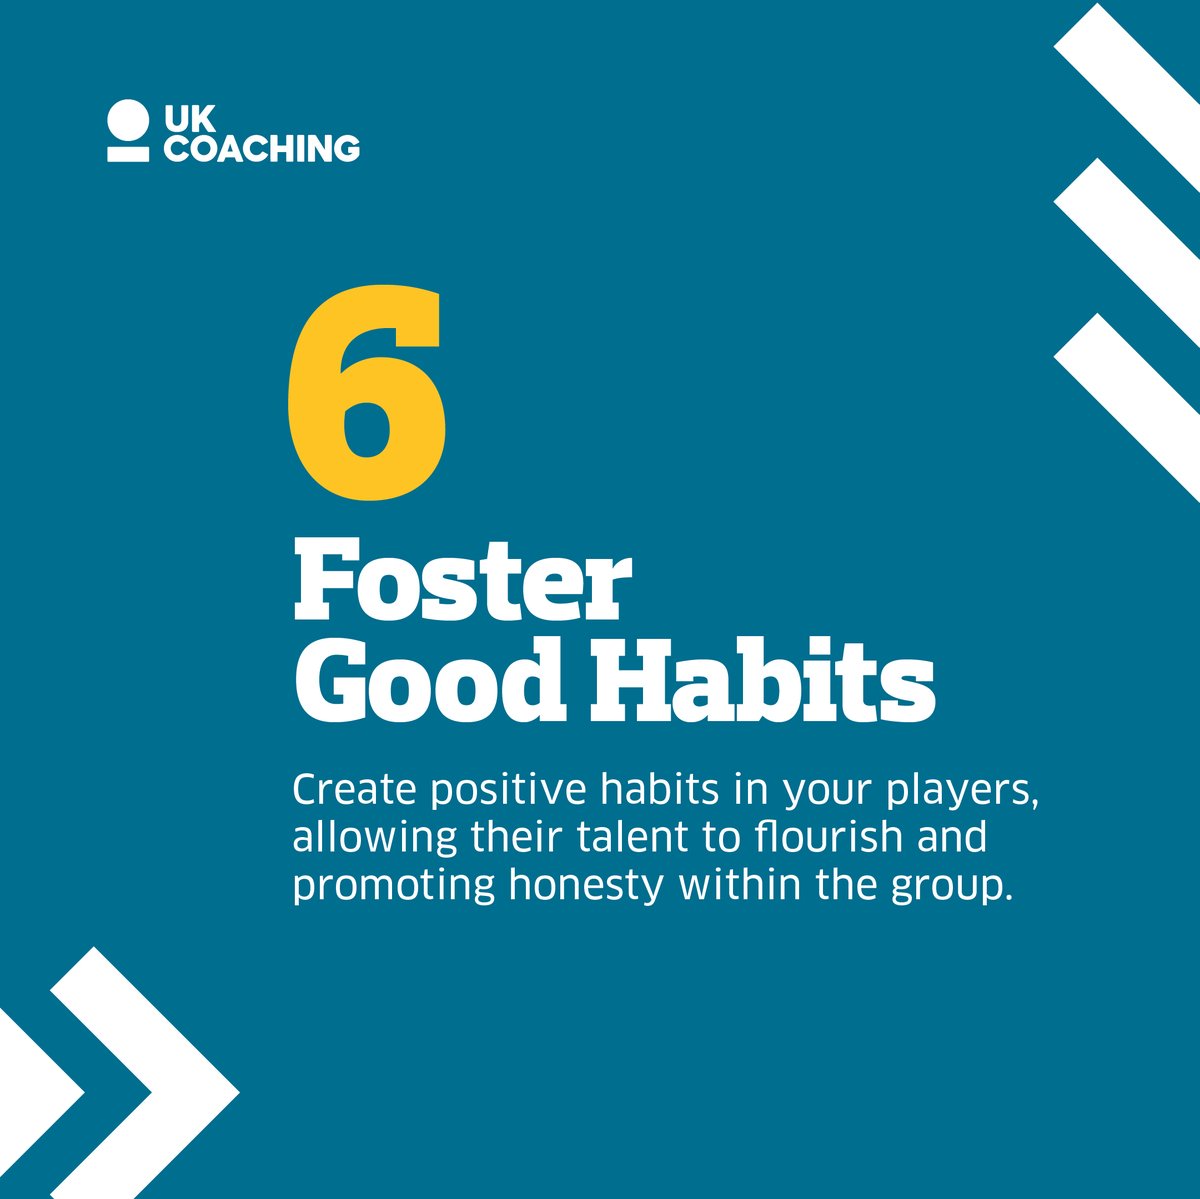 6️⃣ 'Foster Good Habits' – Building positive habits in players is crucial and can lead to both personal and team growth @horsesheed (7/8)